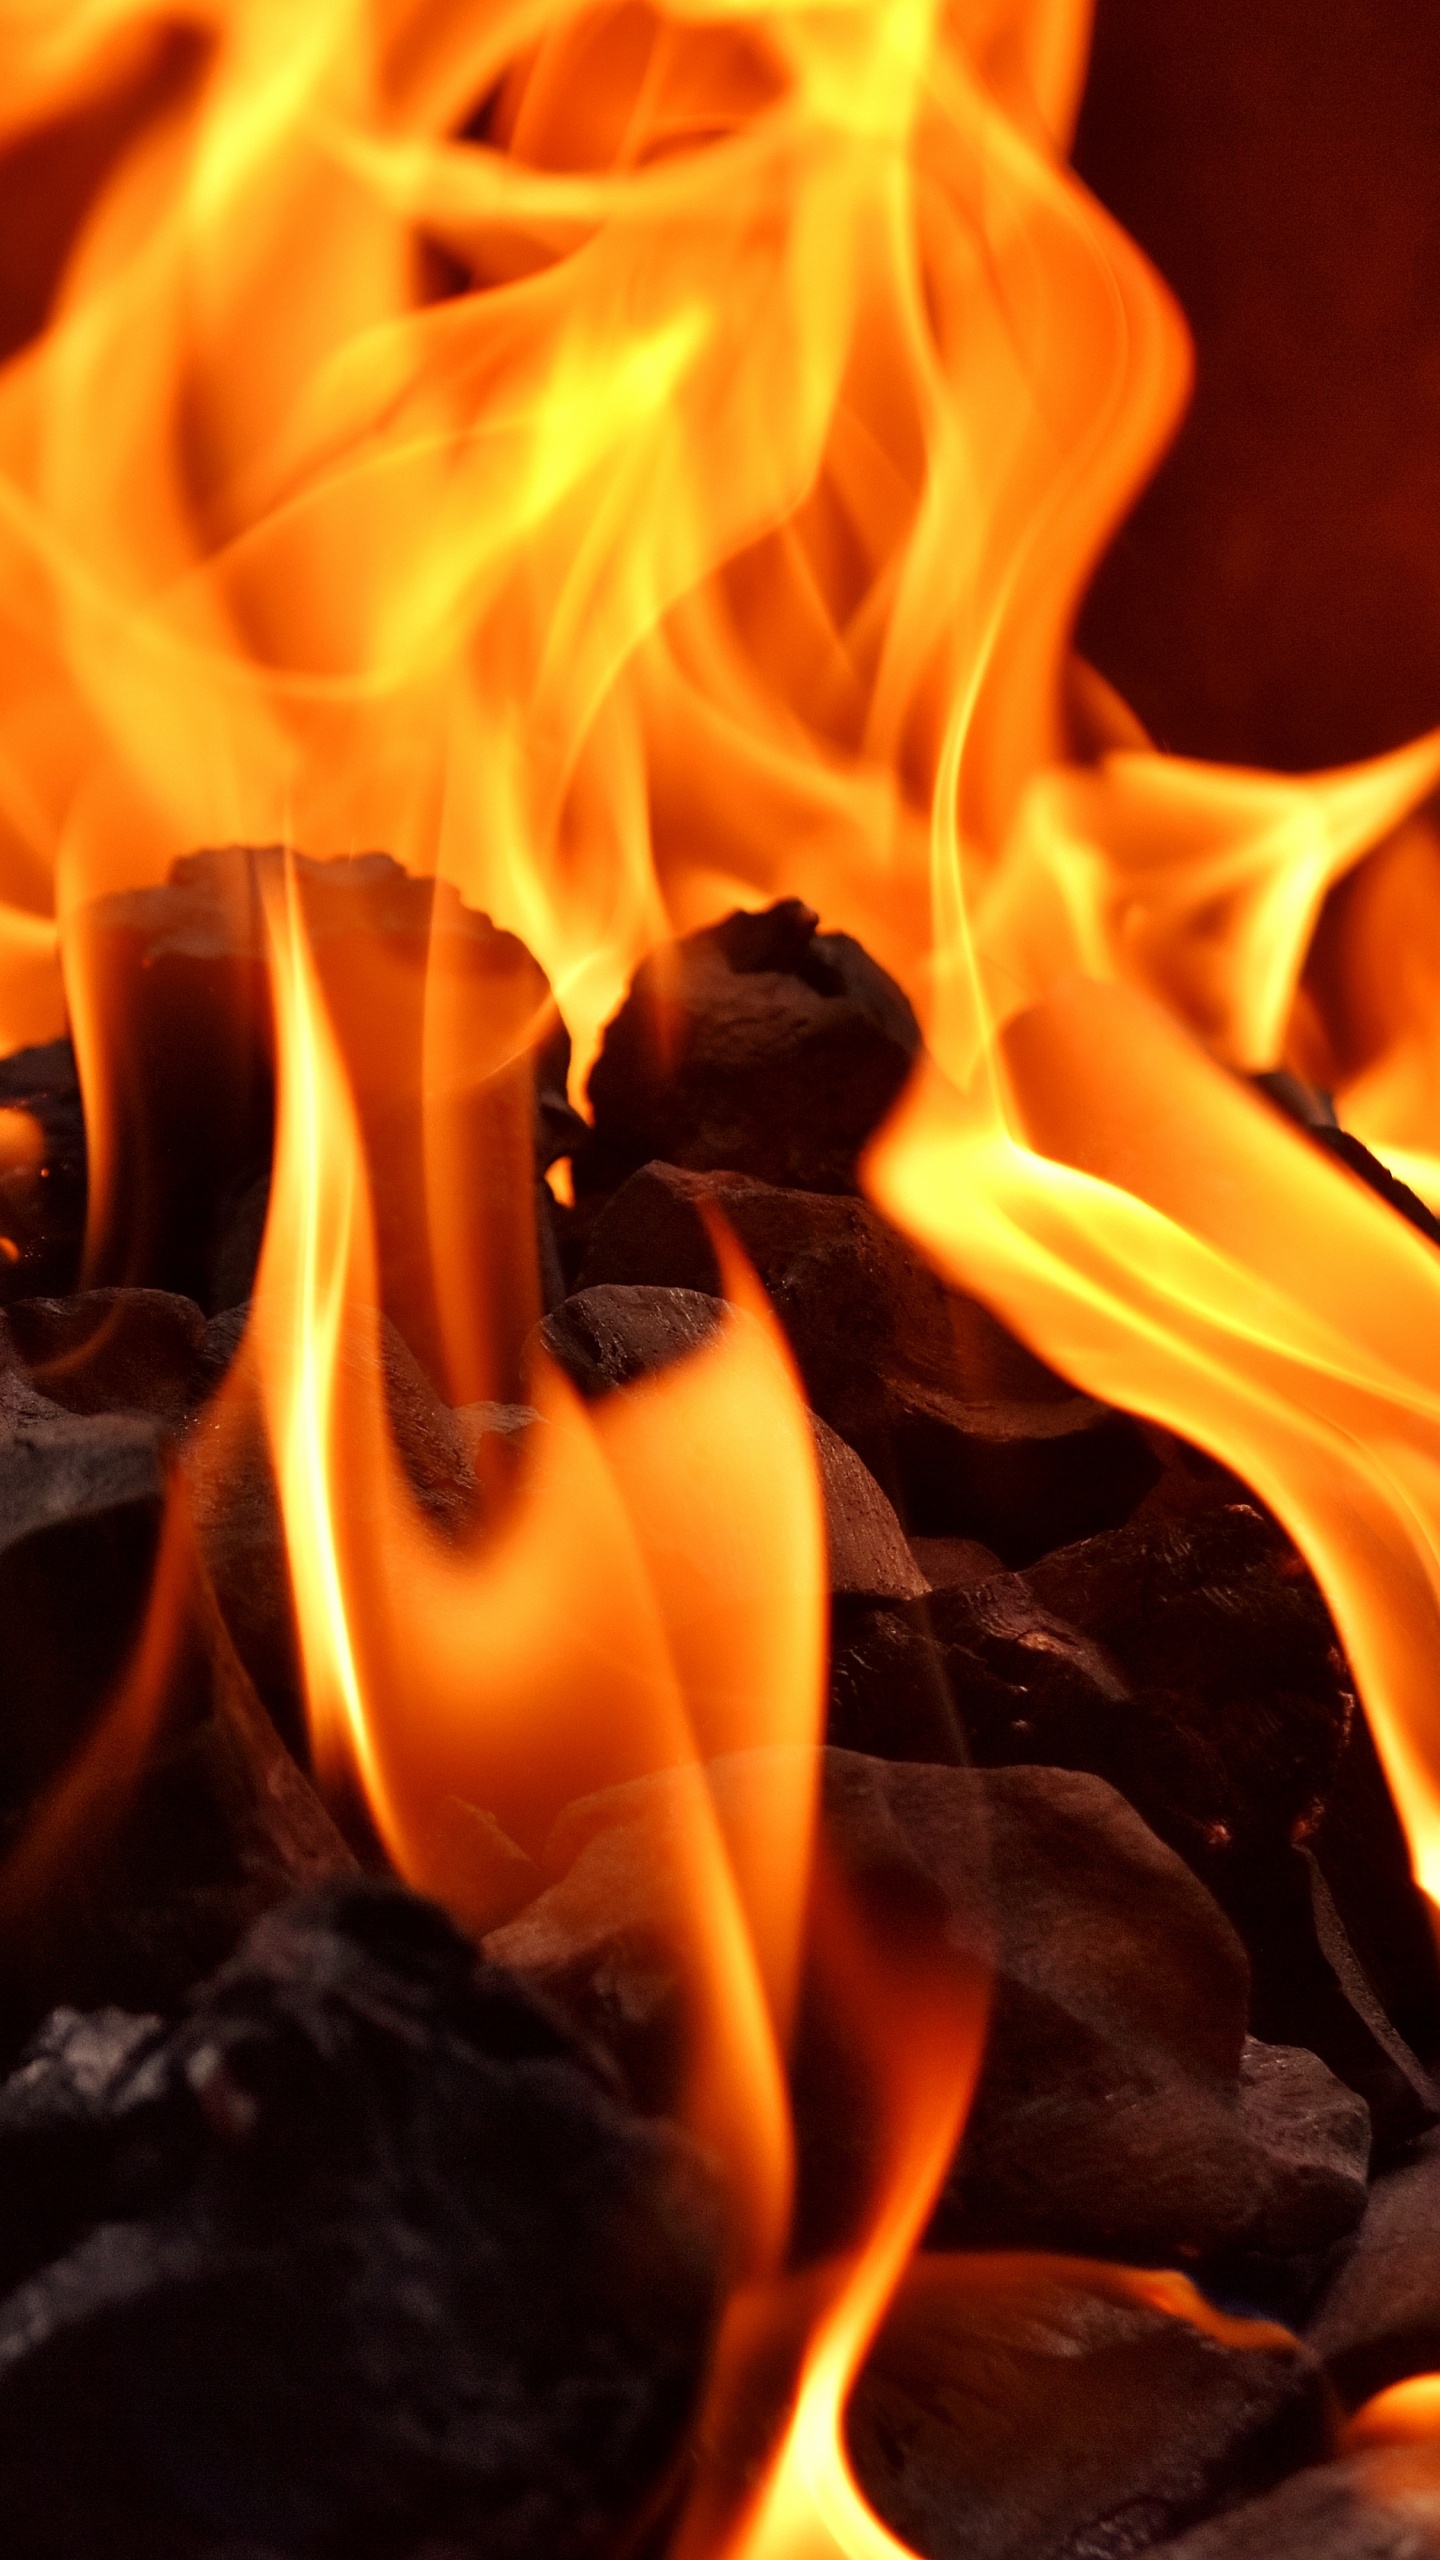 Burning Fire on Black Textile. Wallpaper in 1440x2560 Resolution